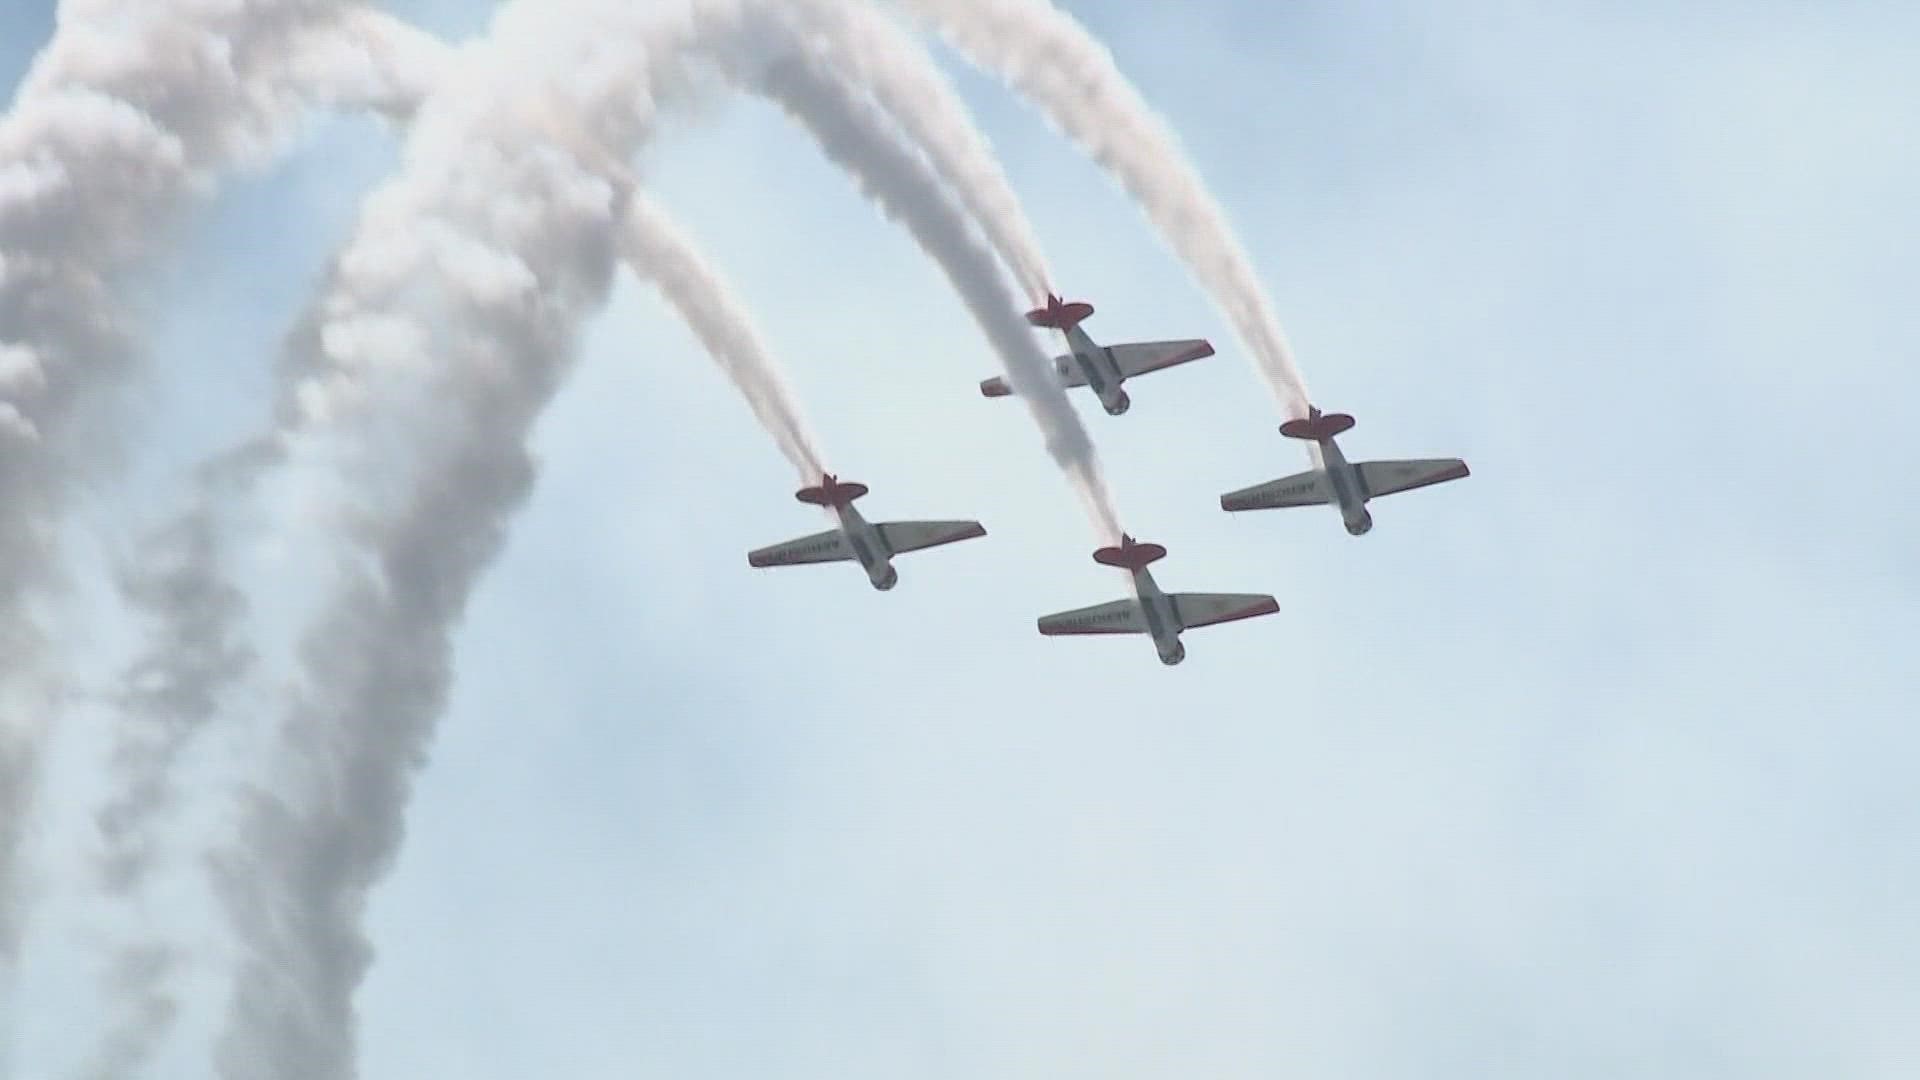 The Smoky Mountain Air show brings in tens of thousands of visitors, as well as tax revenue generated from tourists.